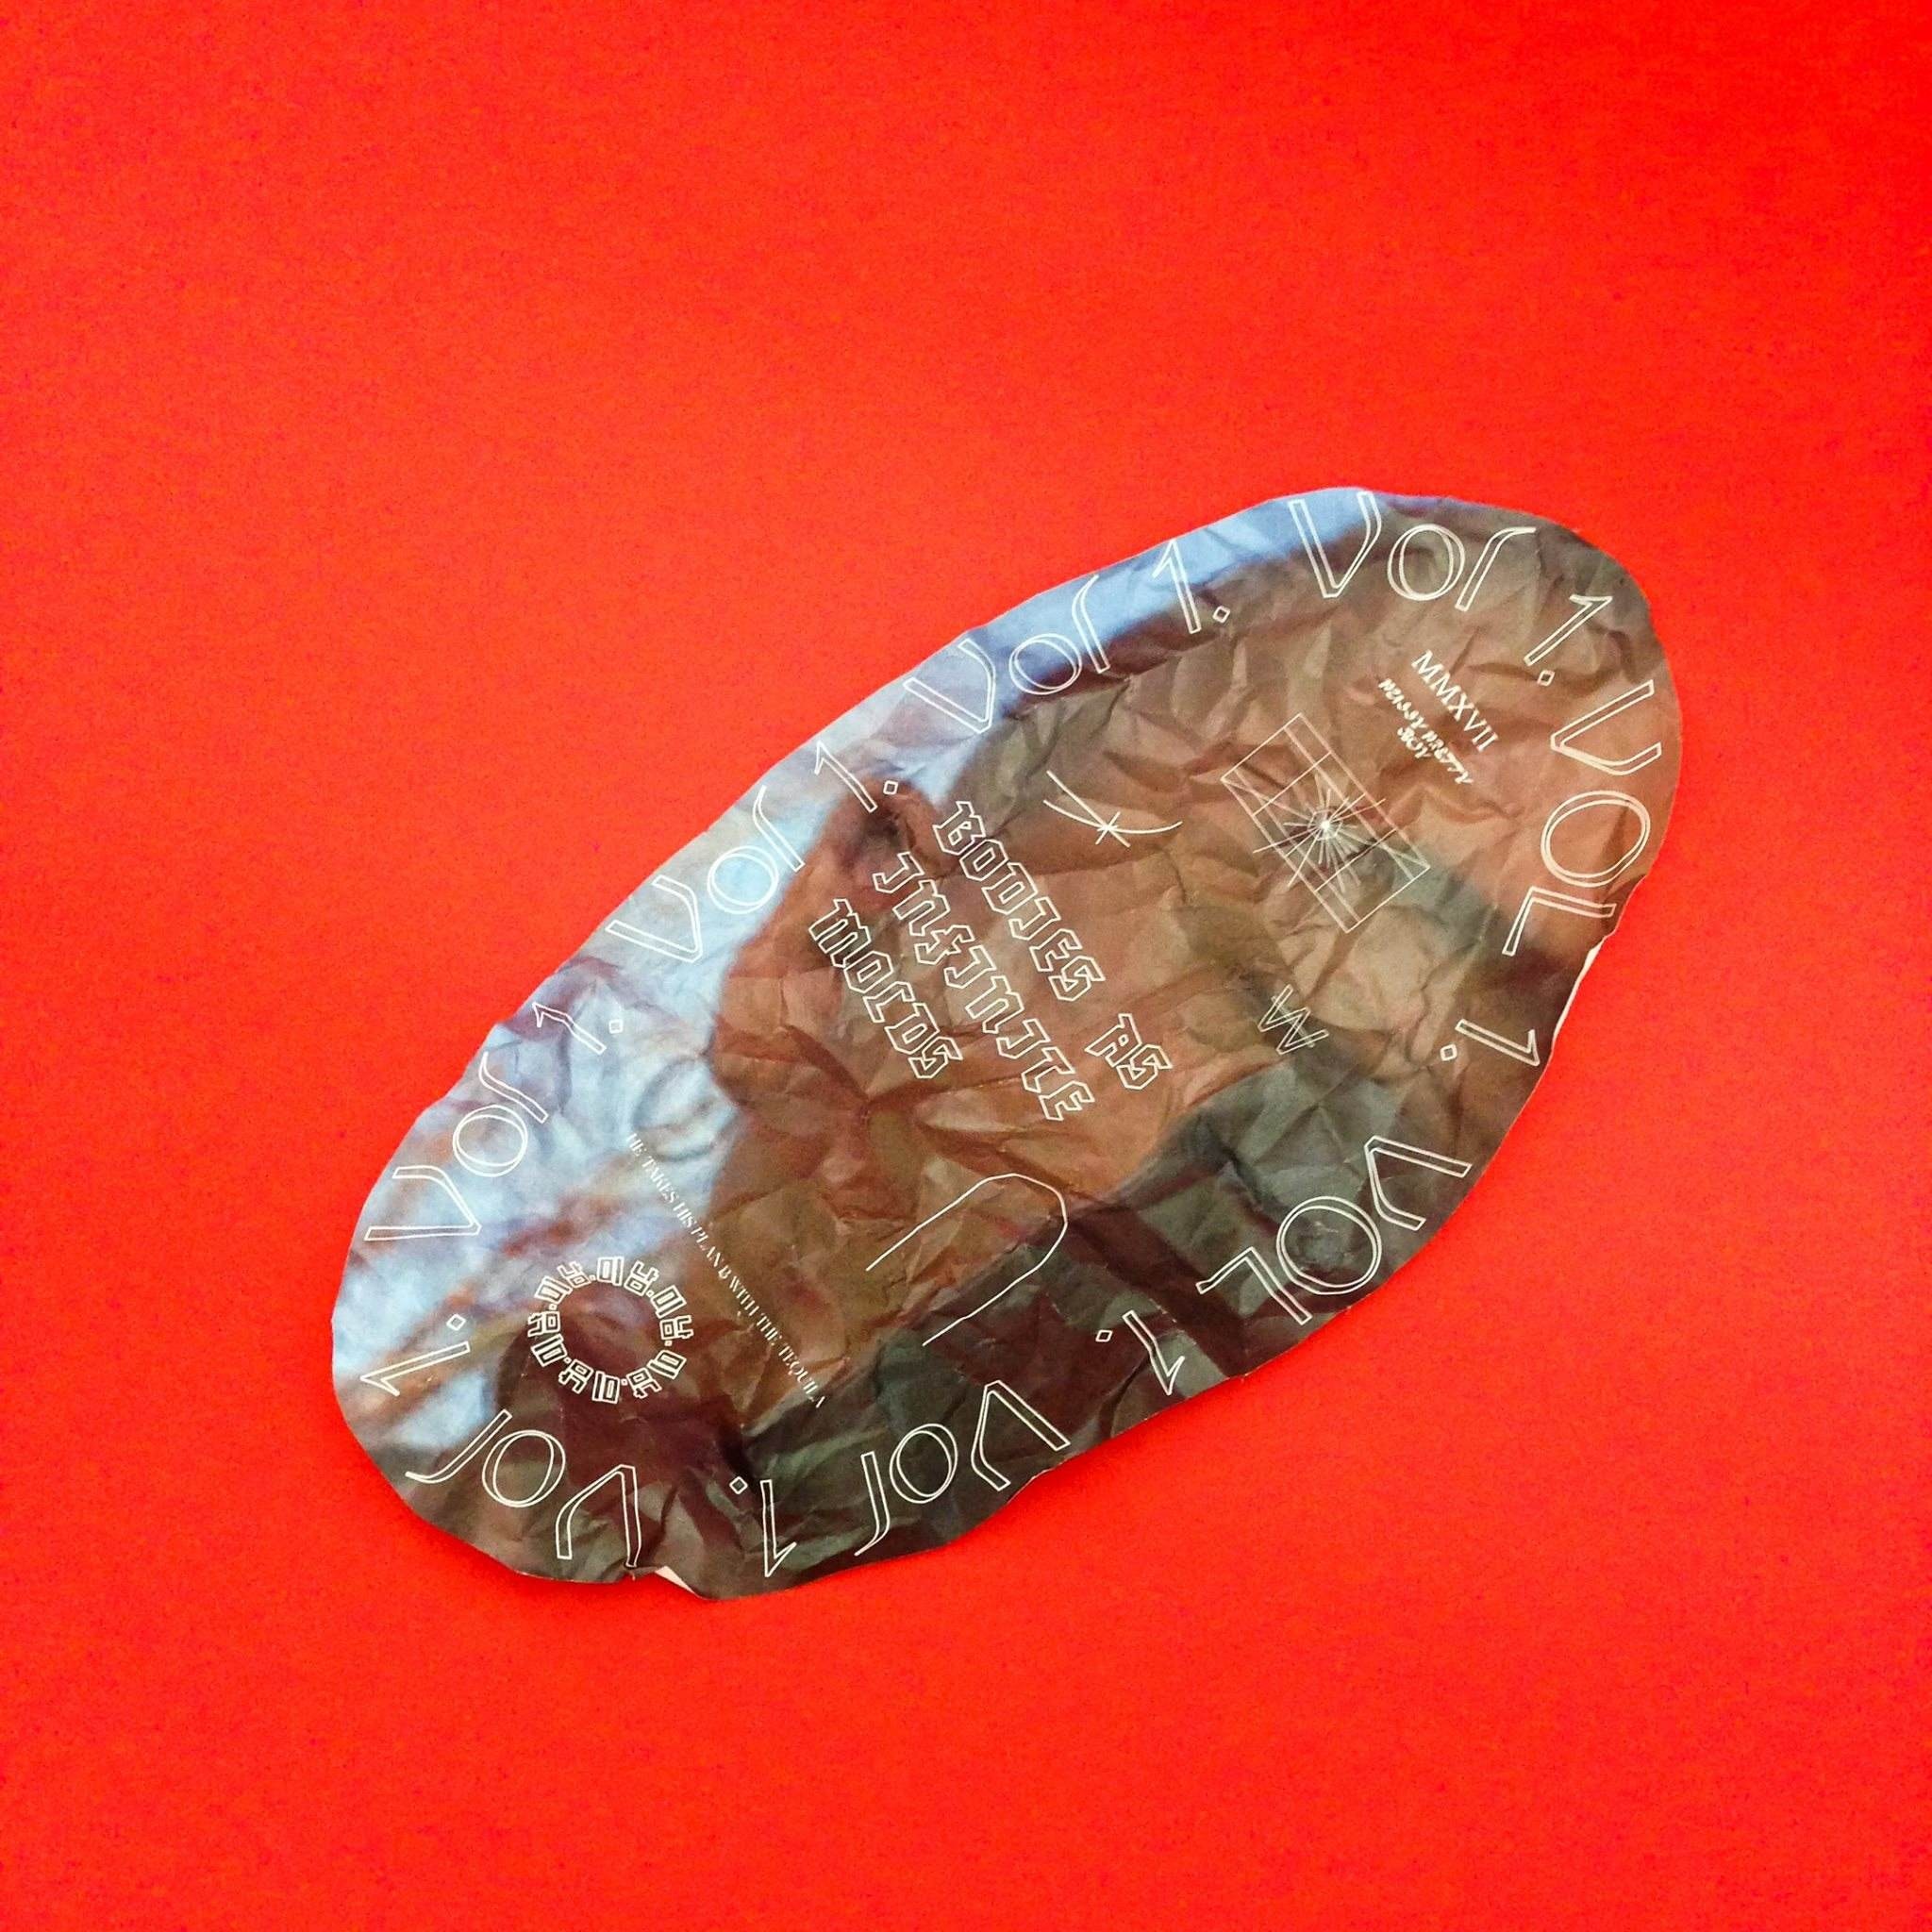 Image of crumpled paper in an oblong shape with complex typography on red background